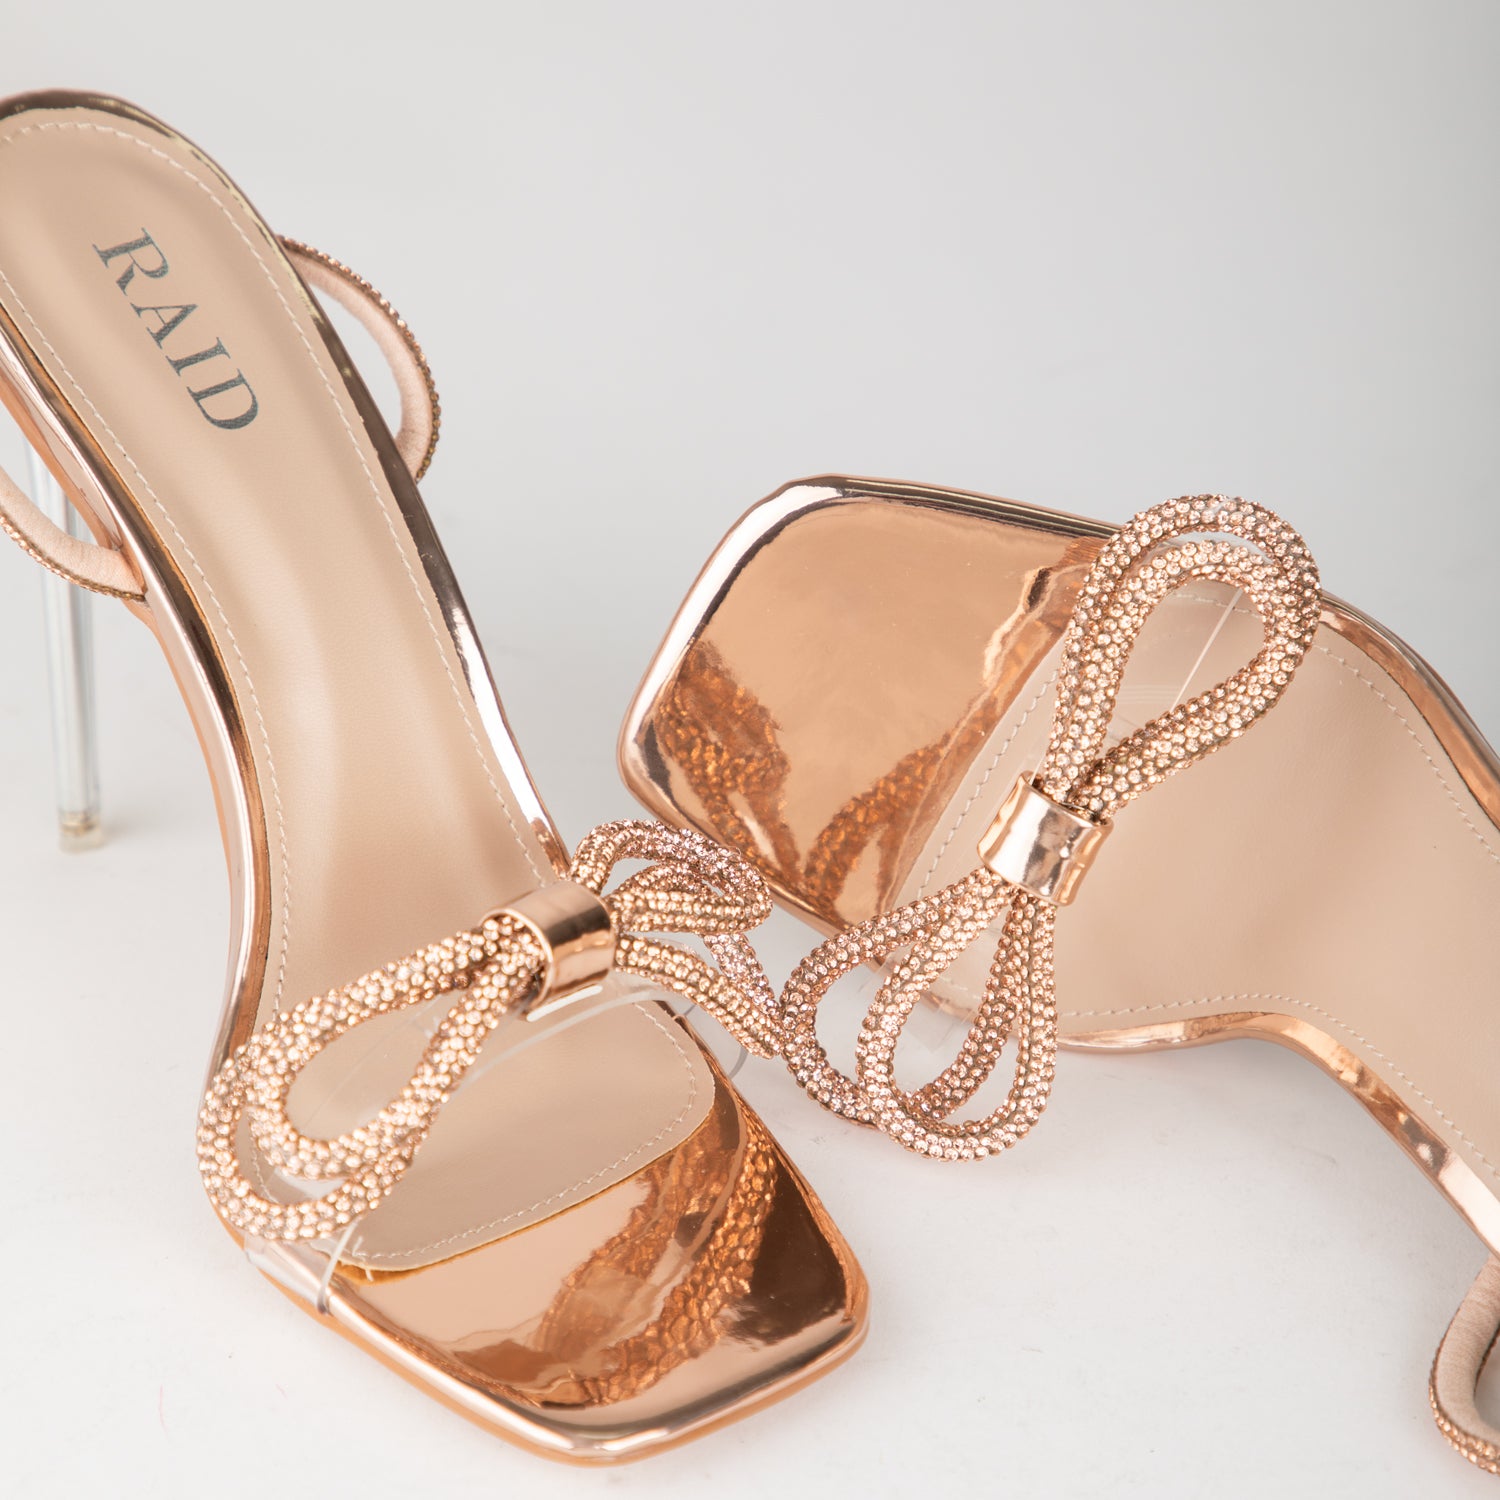 RAID Kyrahh Heeled Sandals in Rose Gold